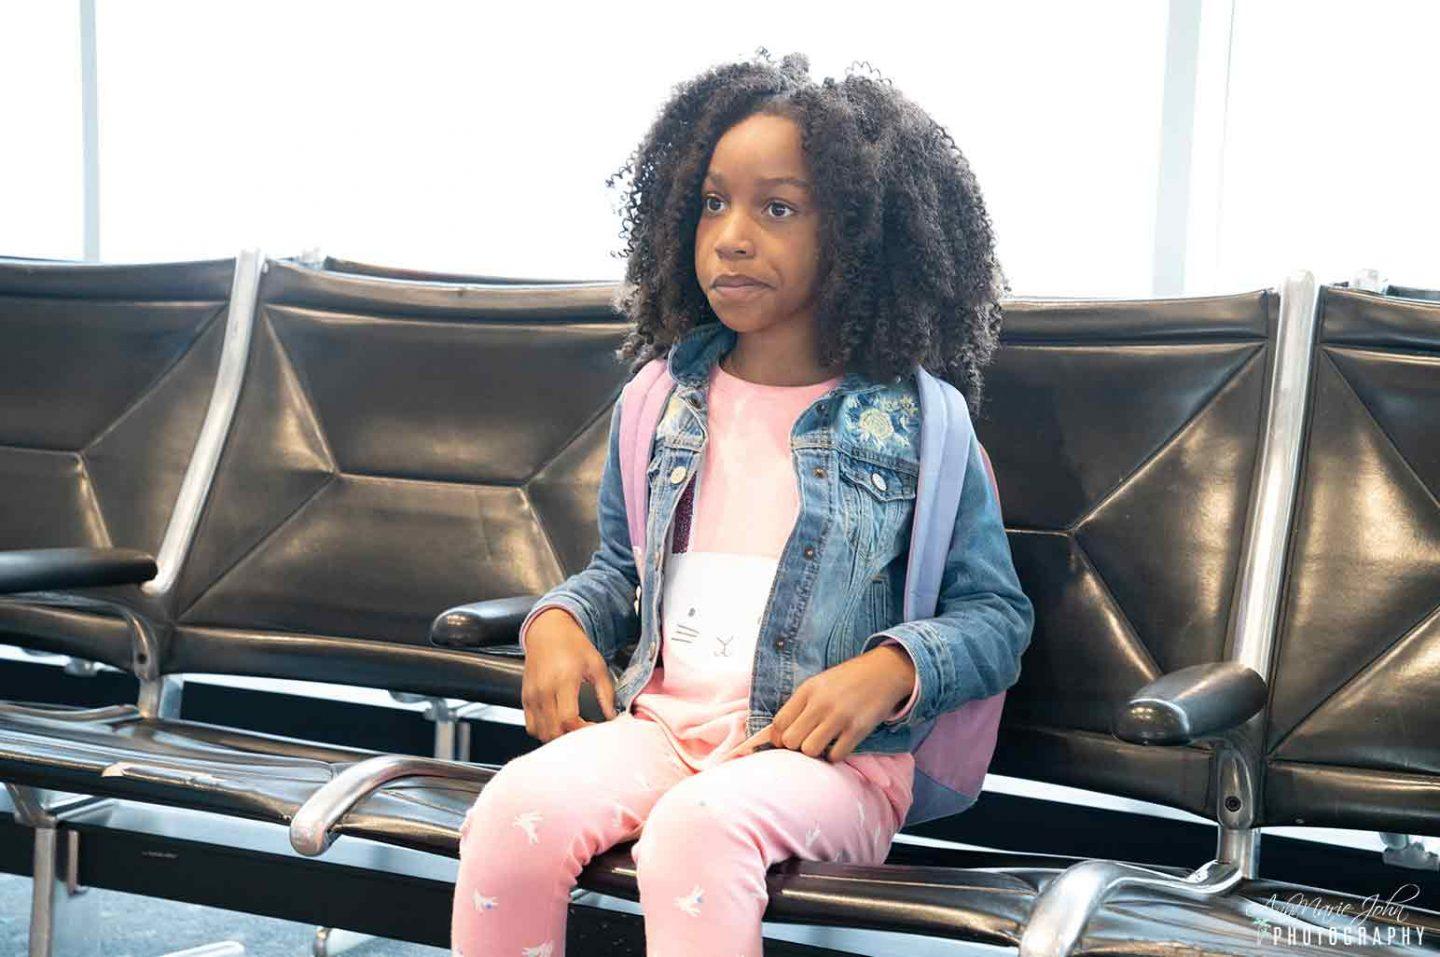 7 Parenting Tips to Survive a Long Flight When Traveling With Kids